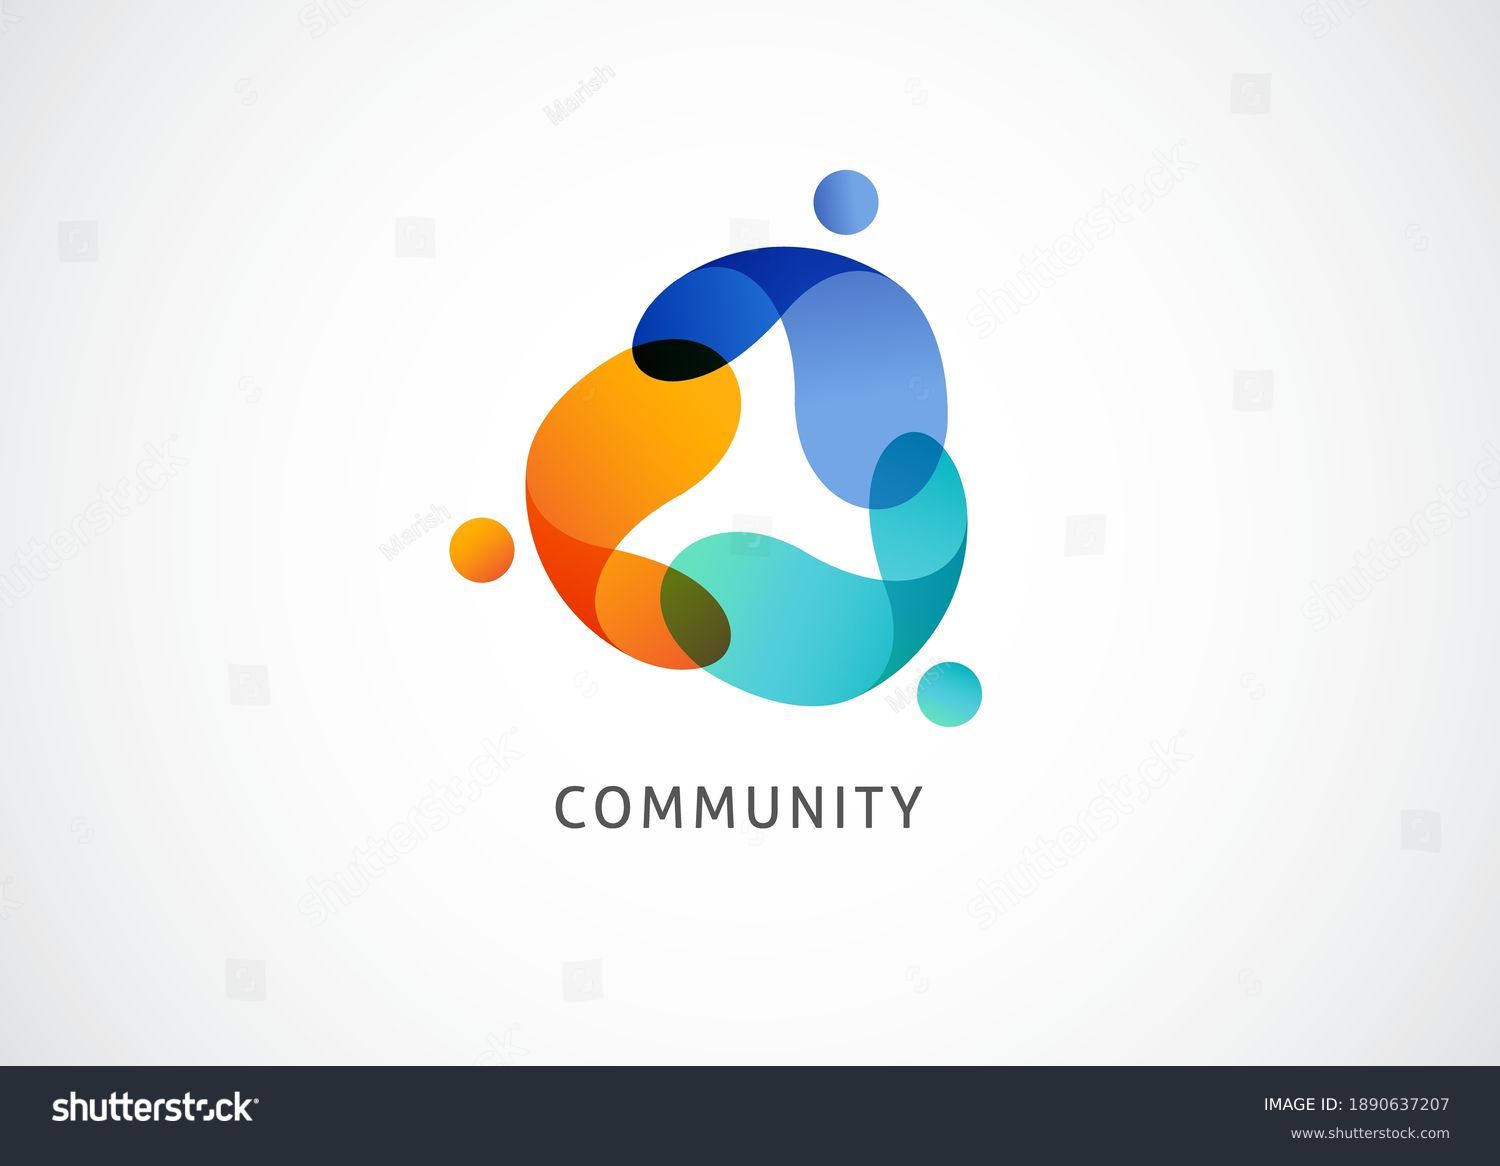 Abstract People symbol, togetherness and community concept design, creative hub, social connection icon, template and logo set #1890637207